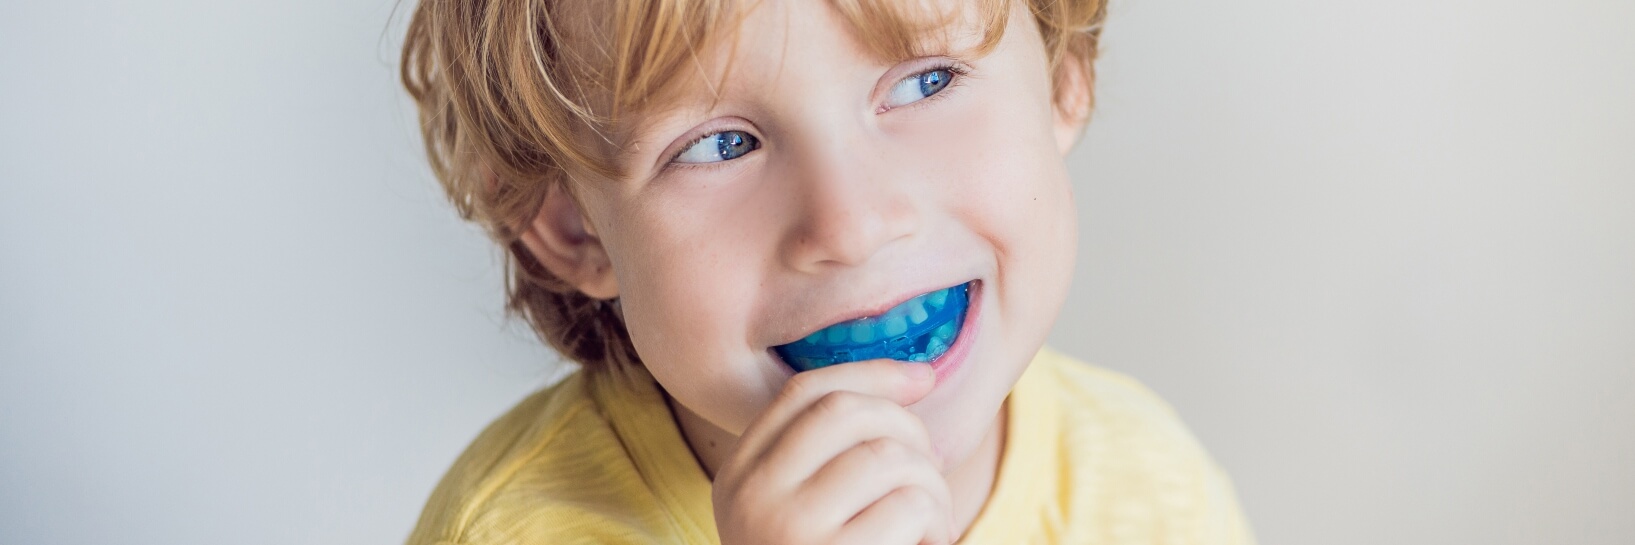 boy with blue mouthguard in his mouth